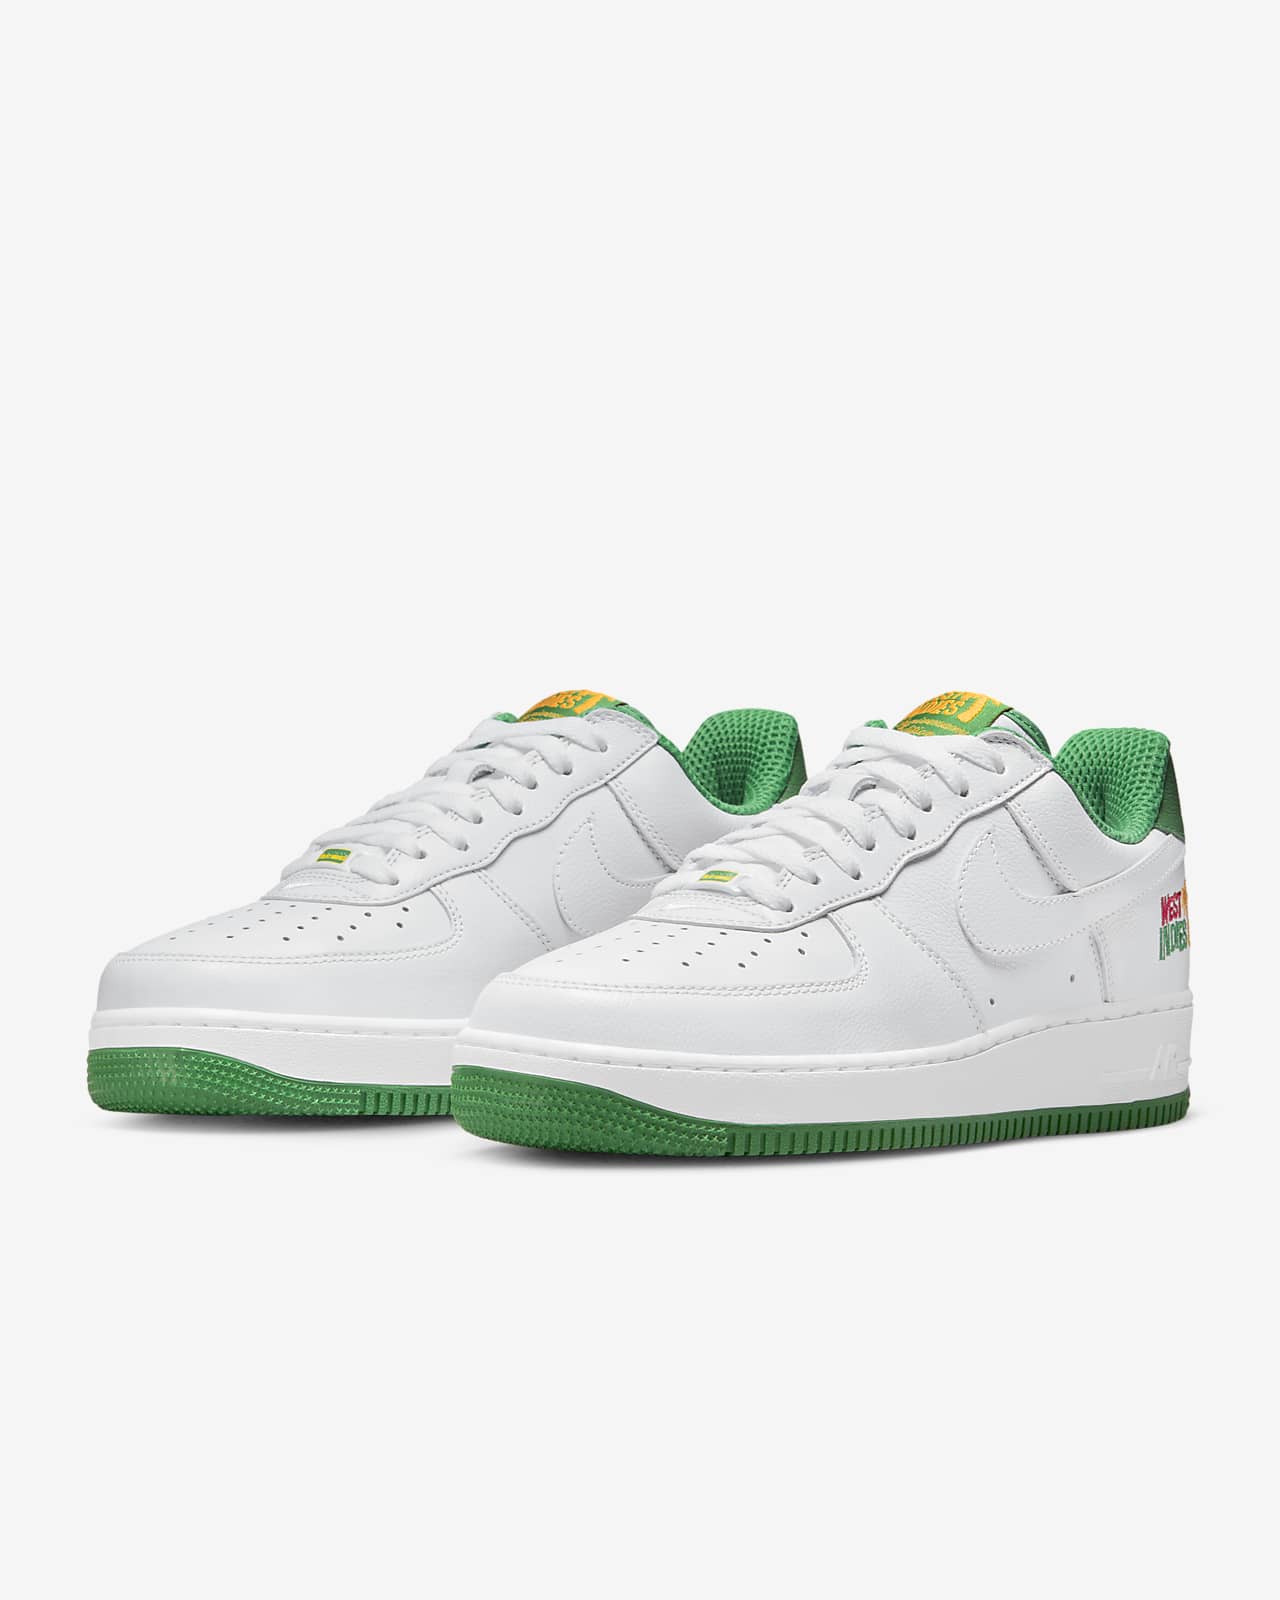 Nike Air Force 1 Low Retro Shoes